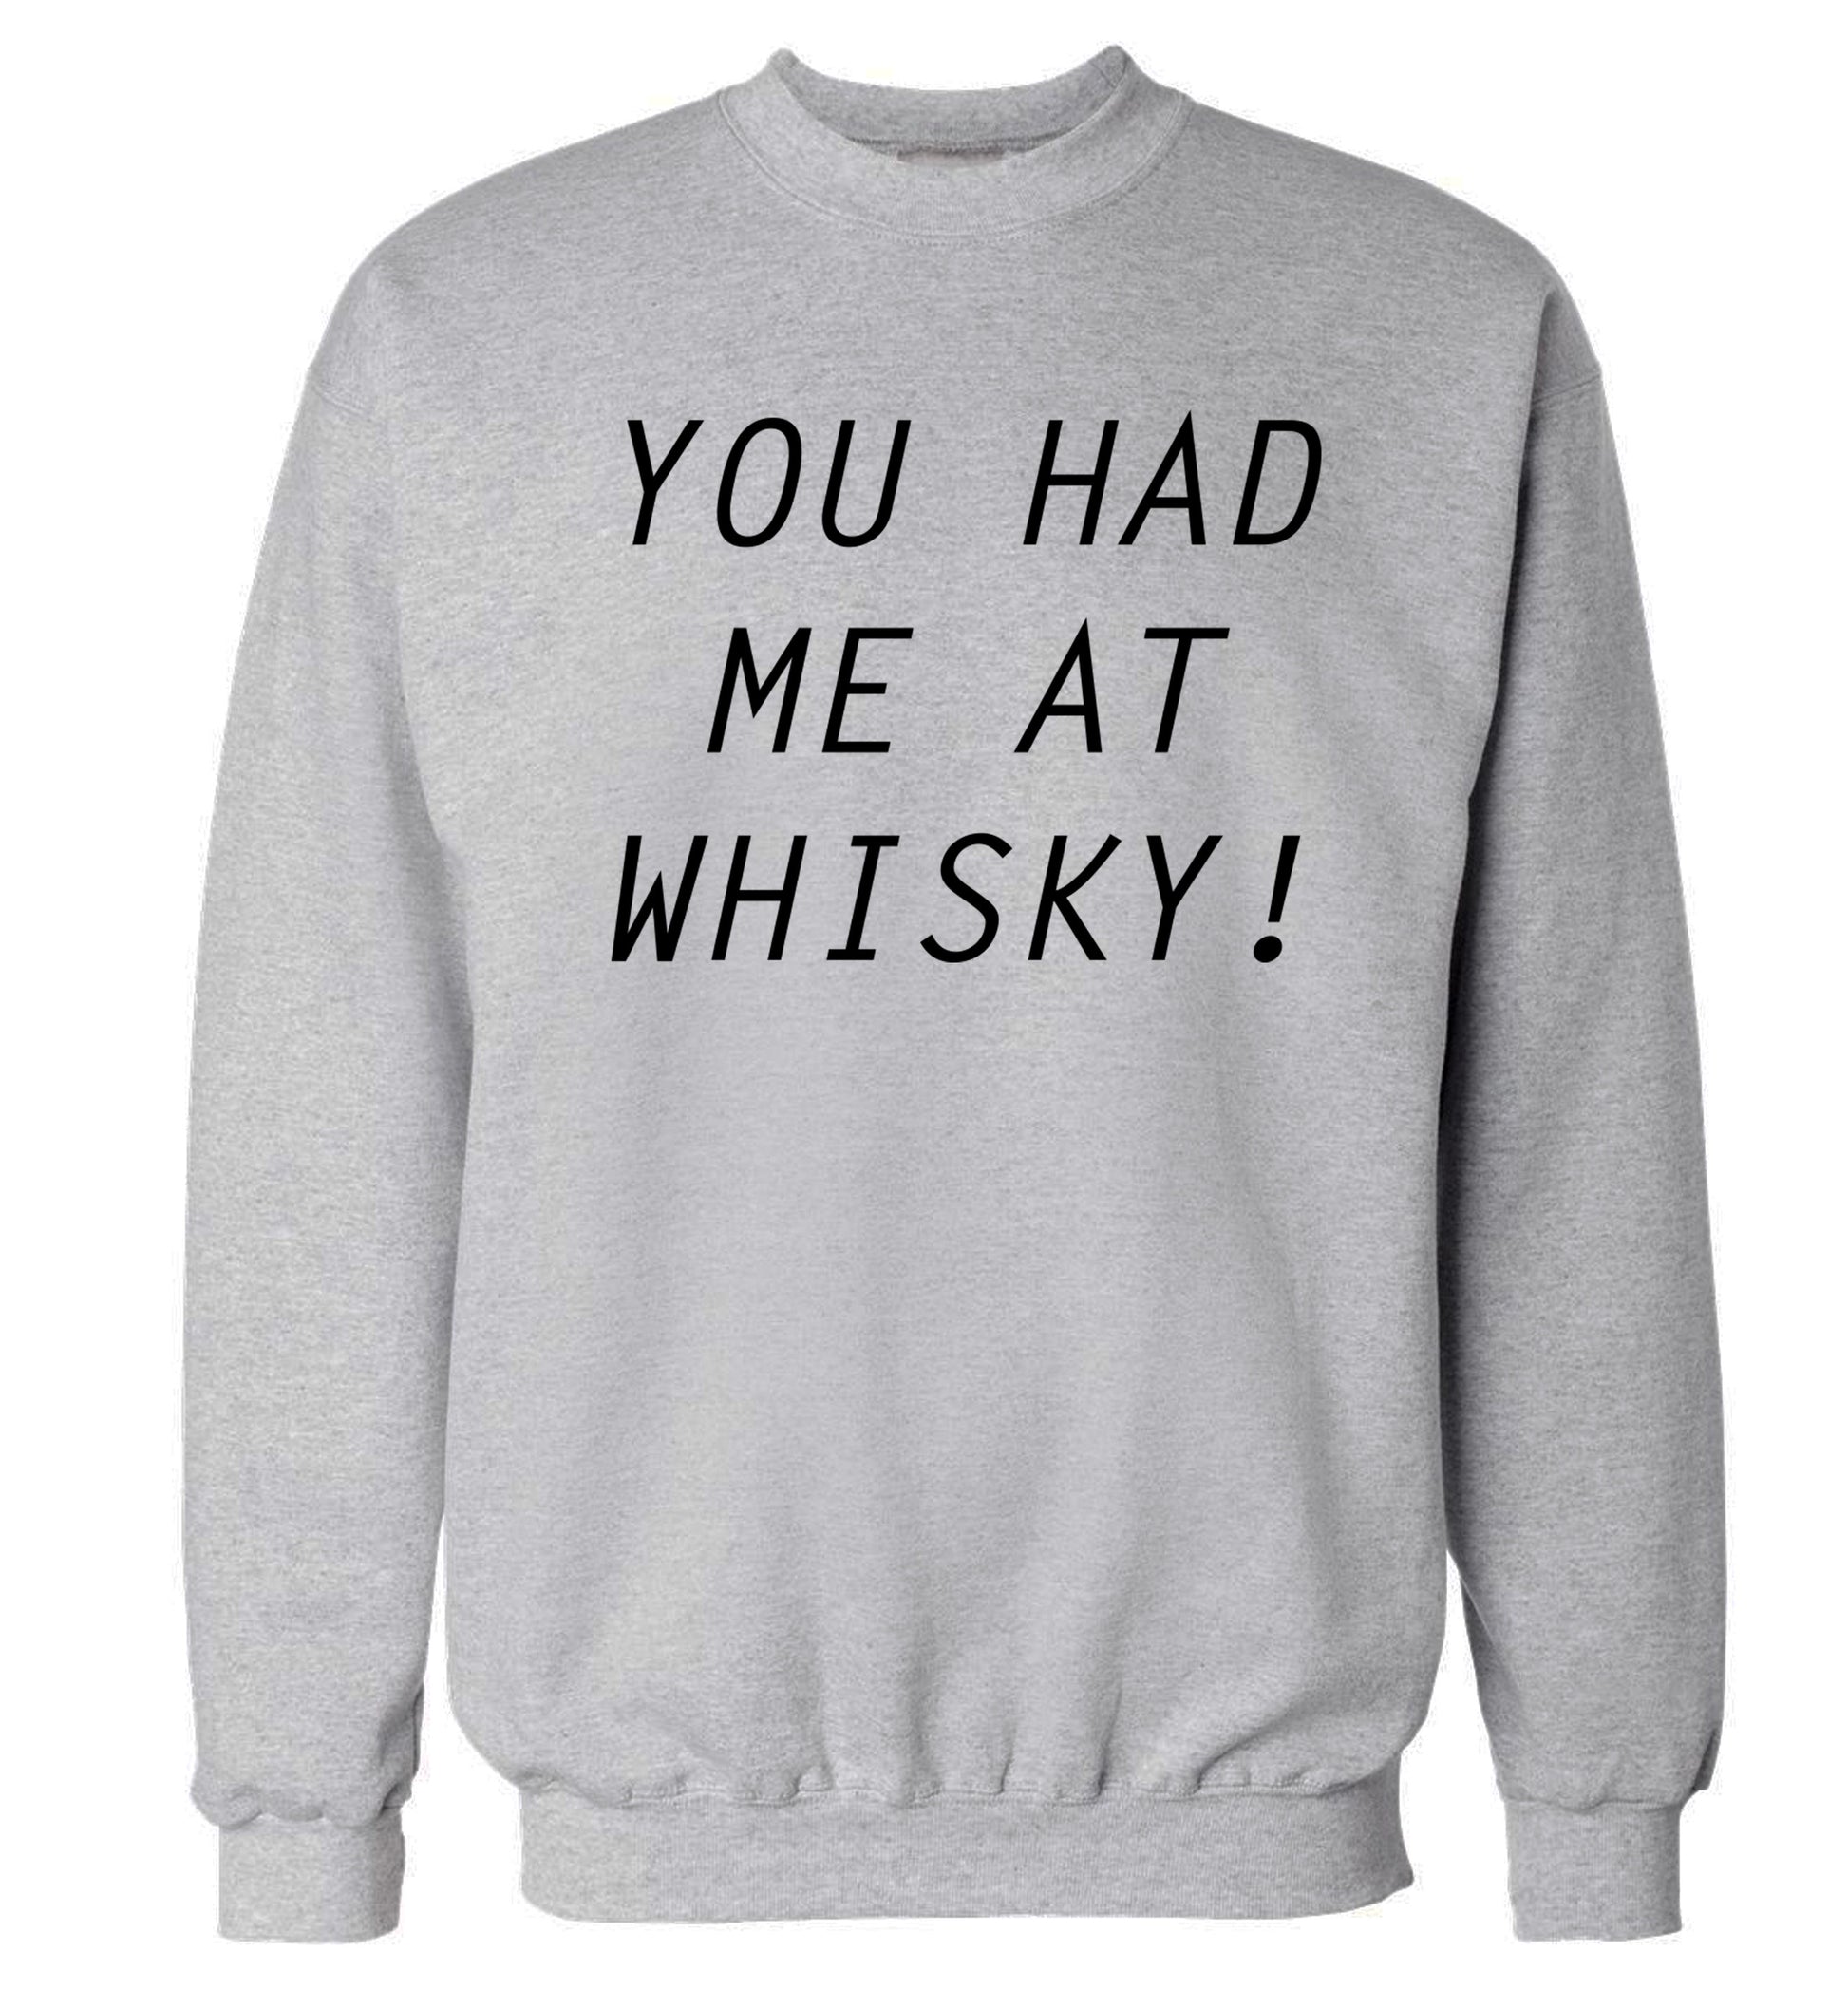 You had me at whisky Adult's unisex grey Sweater 2XL